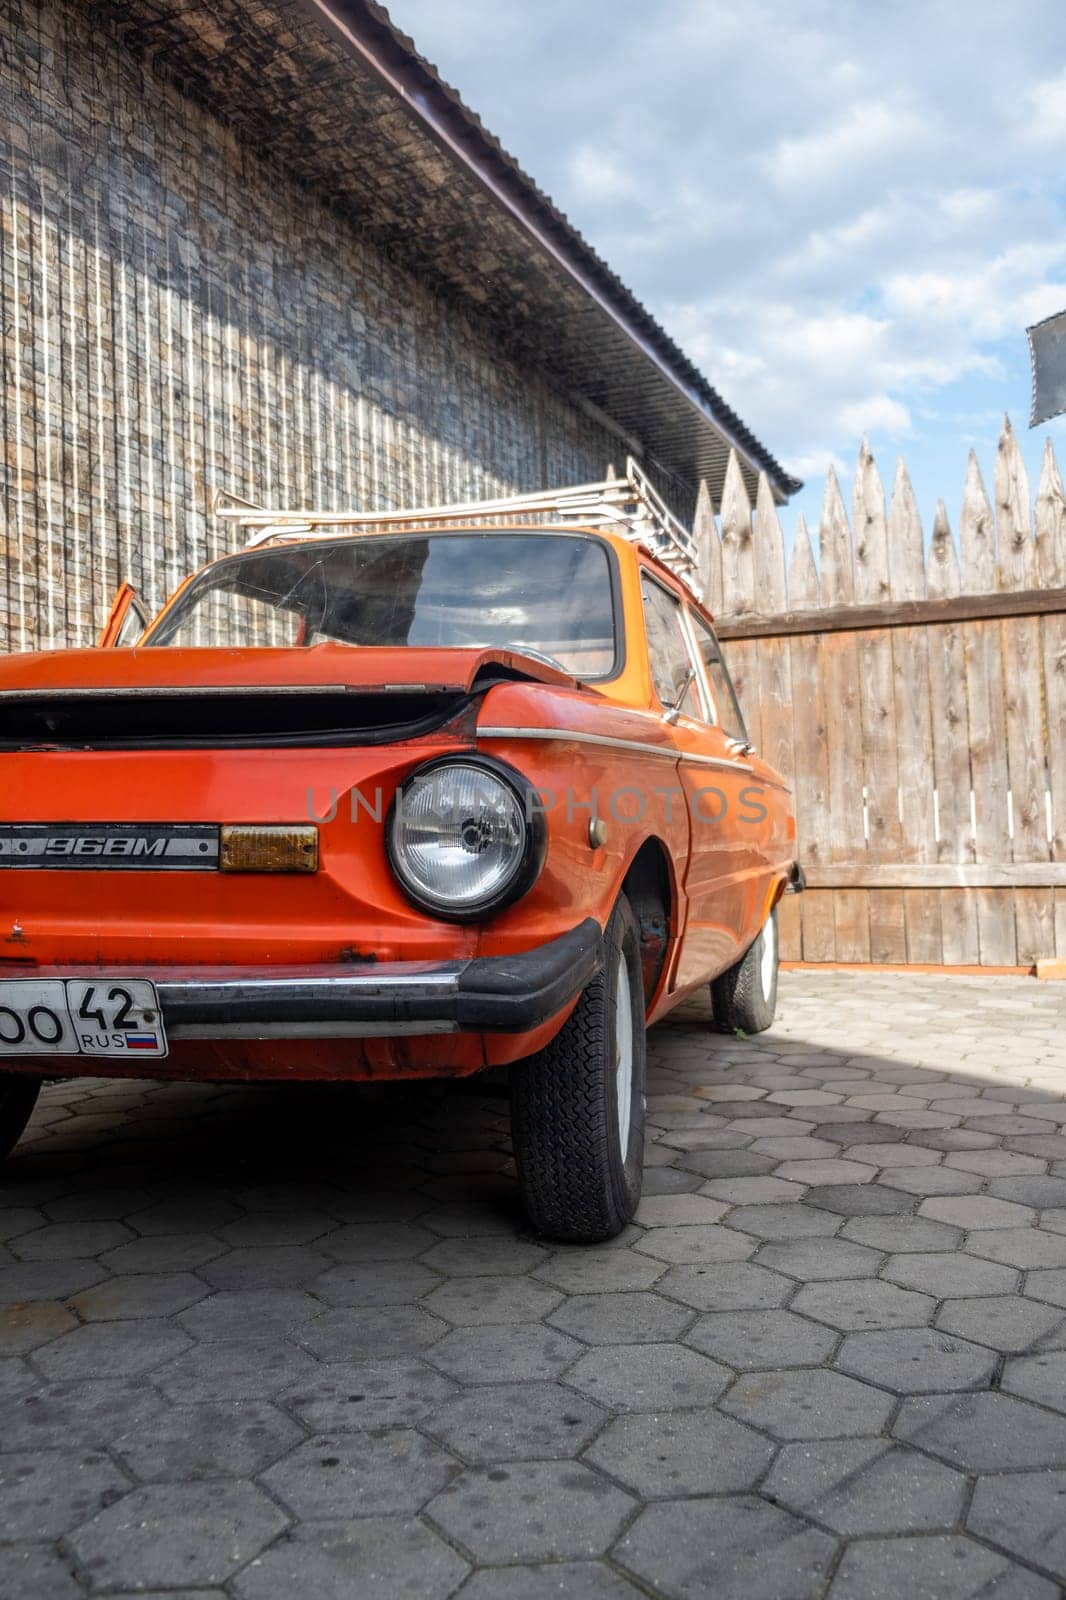 19.09.2023, Kemerovo, Russia. Red old Zaporozhets car in the yard on a sunny day. The car has round headlights.